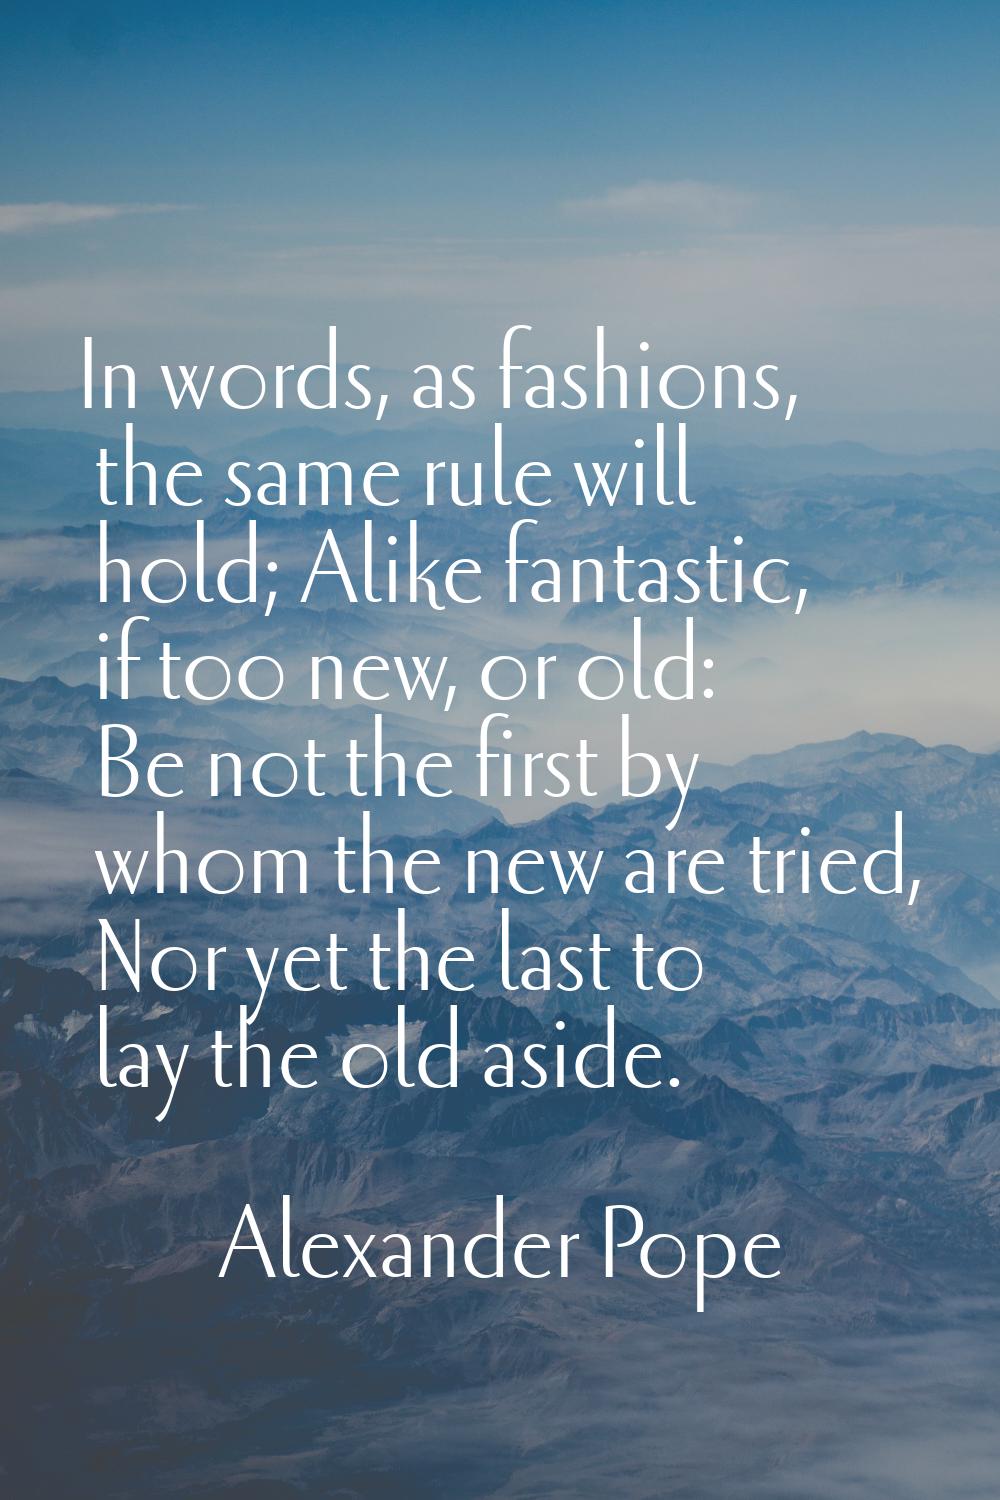 In words, as fashions, the same rule will hold; Alike fantastic, if too new, or old: Be not the fir